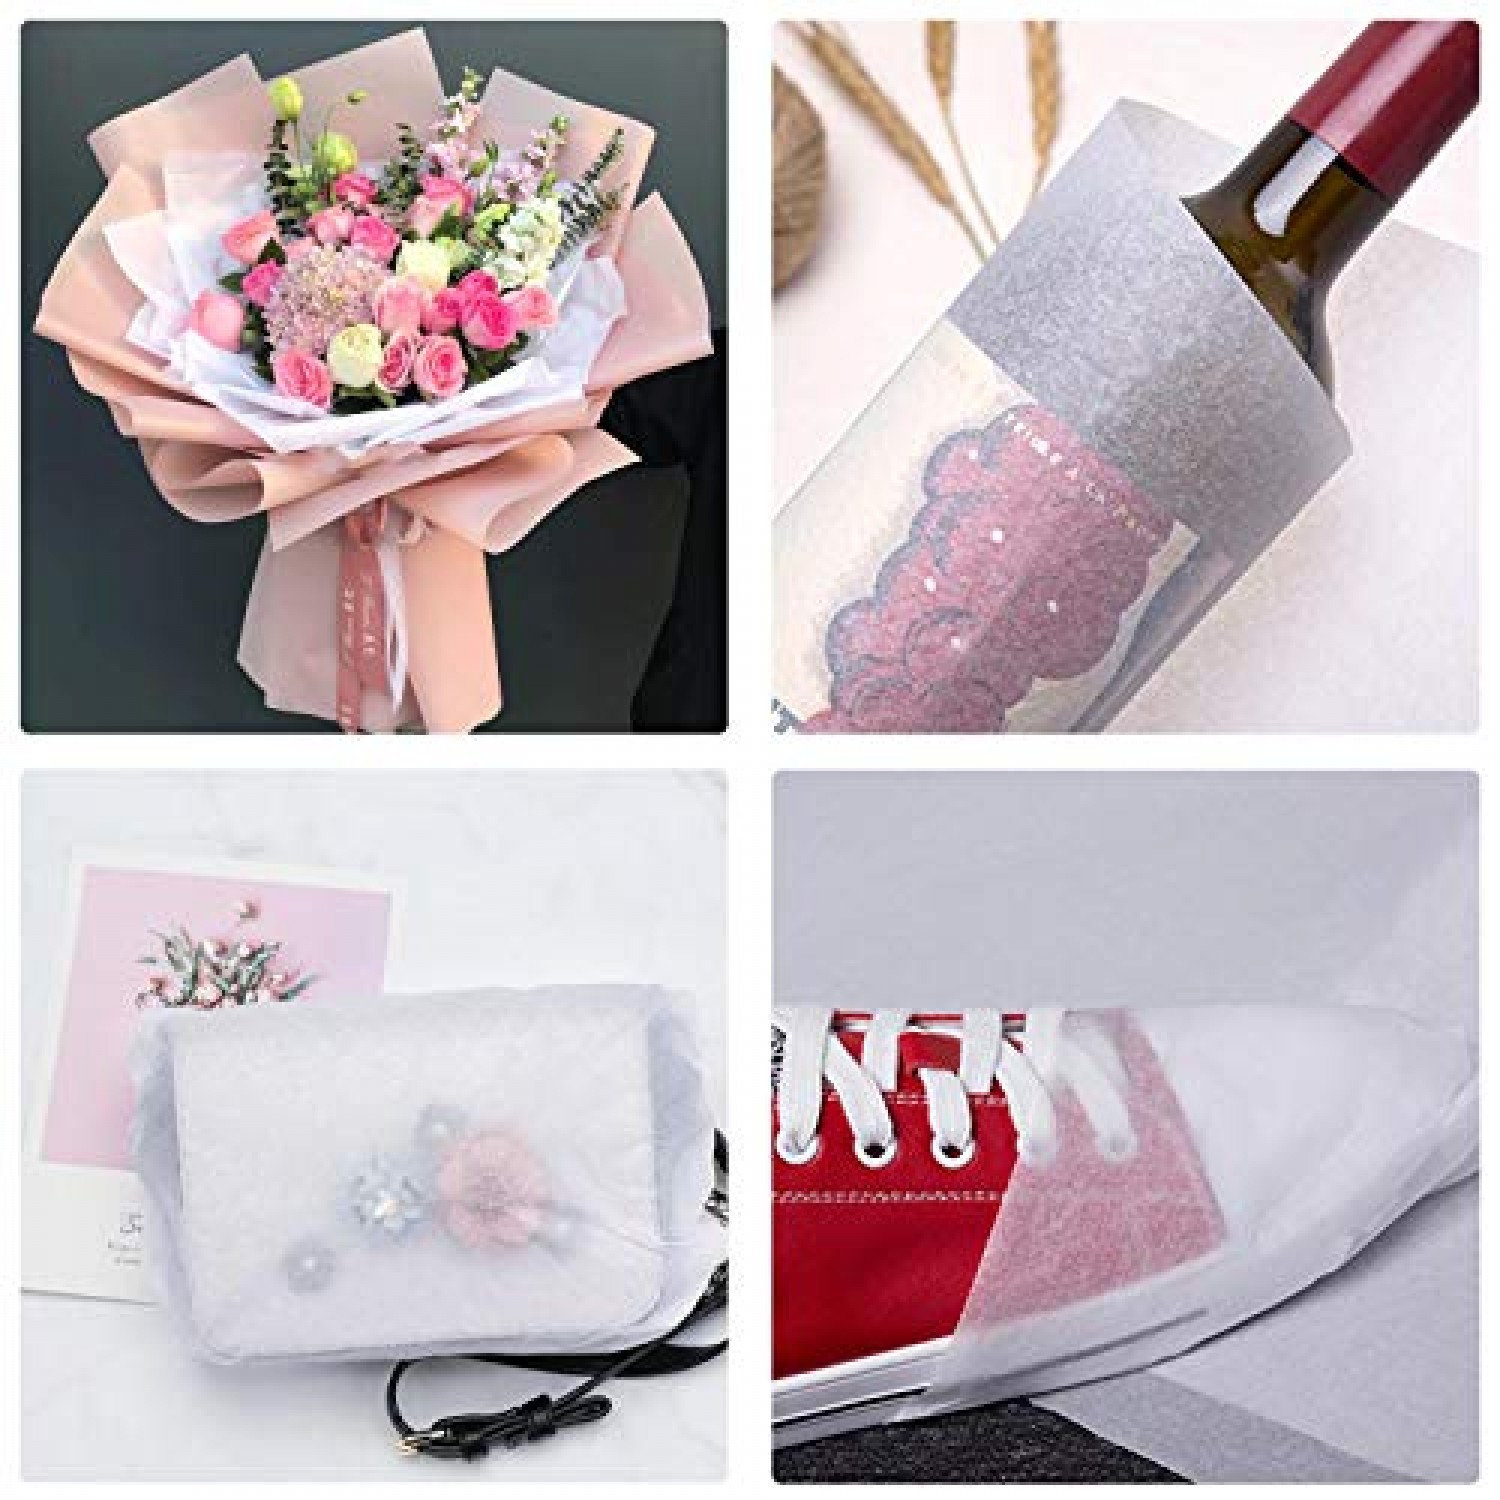 Loygkgas New 100 Sheets Liner Tissue Paper Wrapping Shoes Clothes Gift Packaging (Pink), Size: As Shown